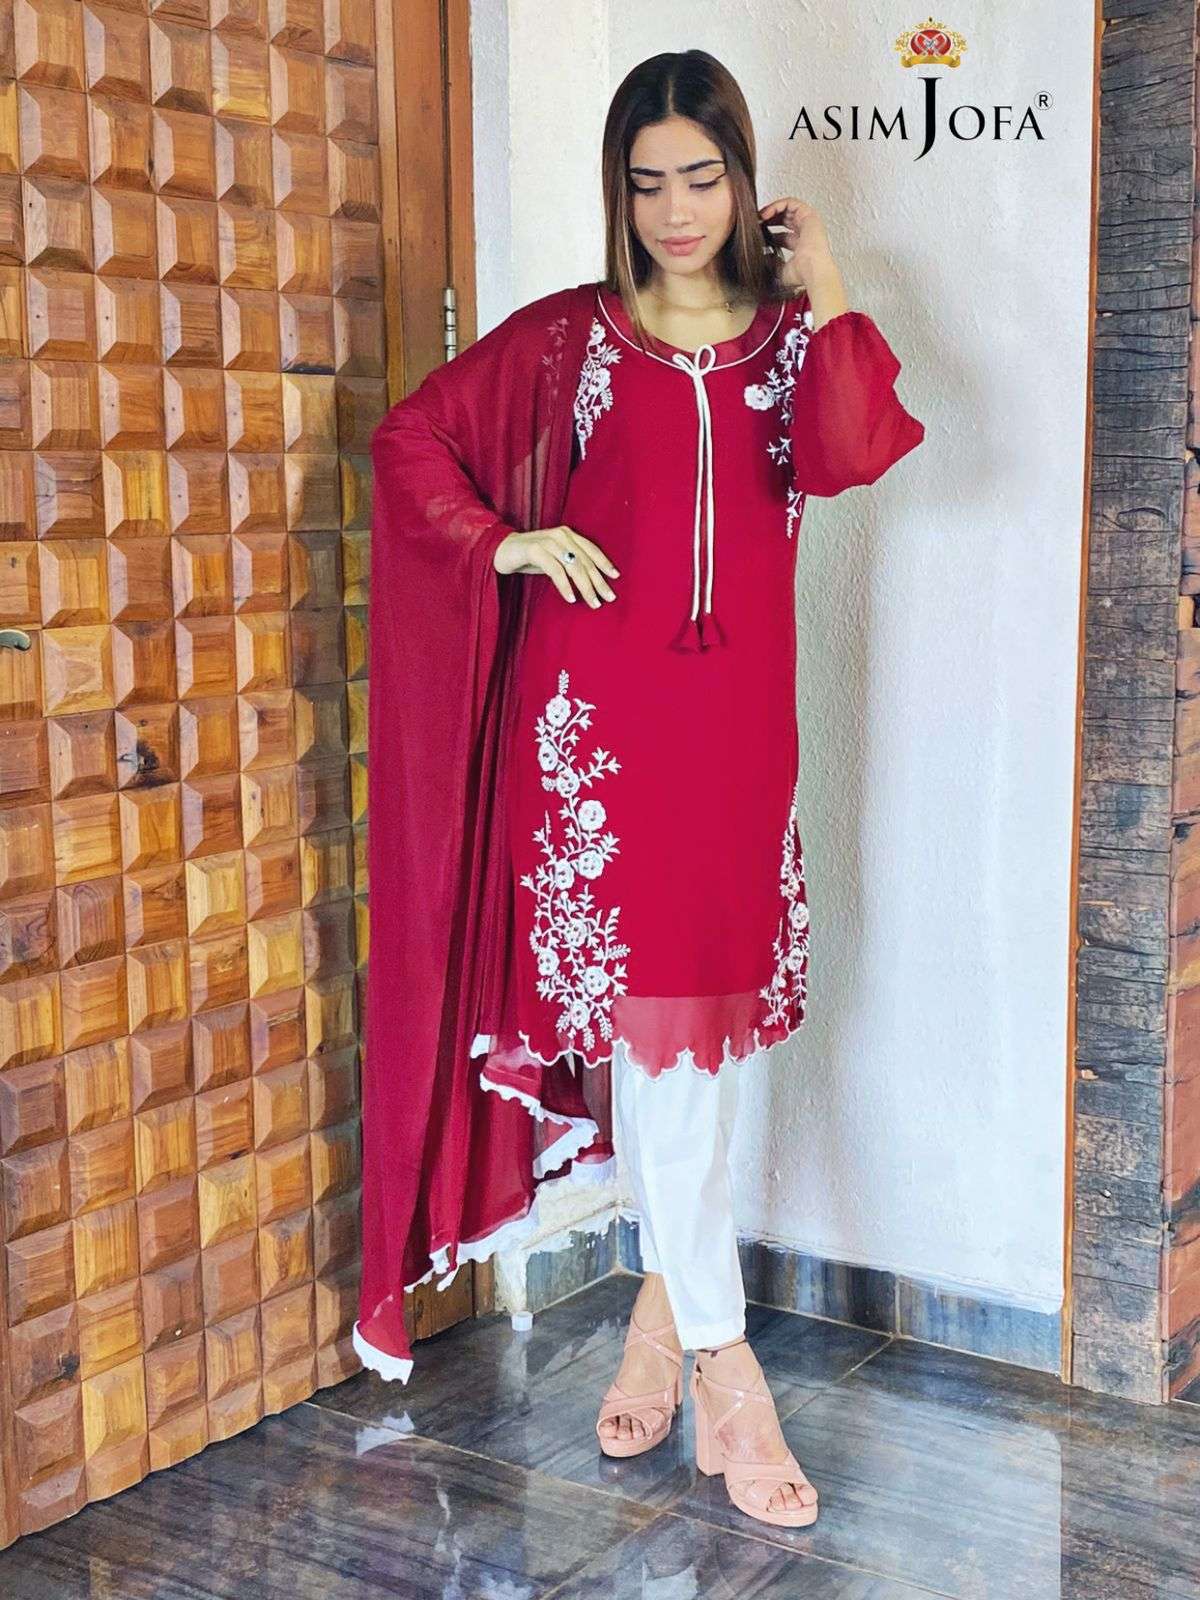 asimjofa design number 56094 red and white readymade dress collection pakistani concept readymade suit